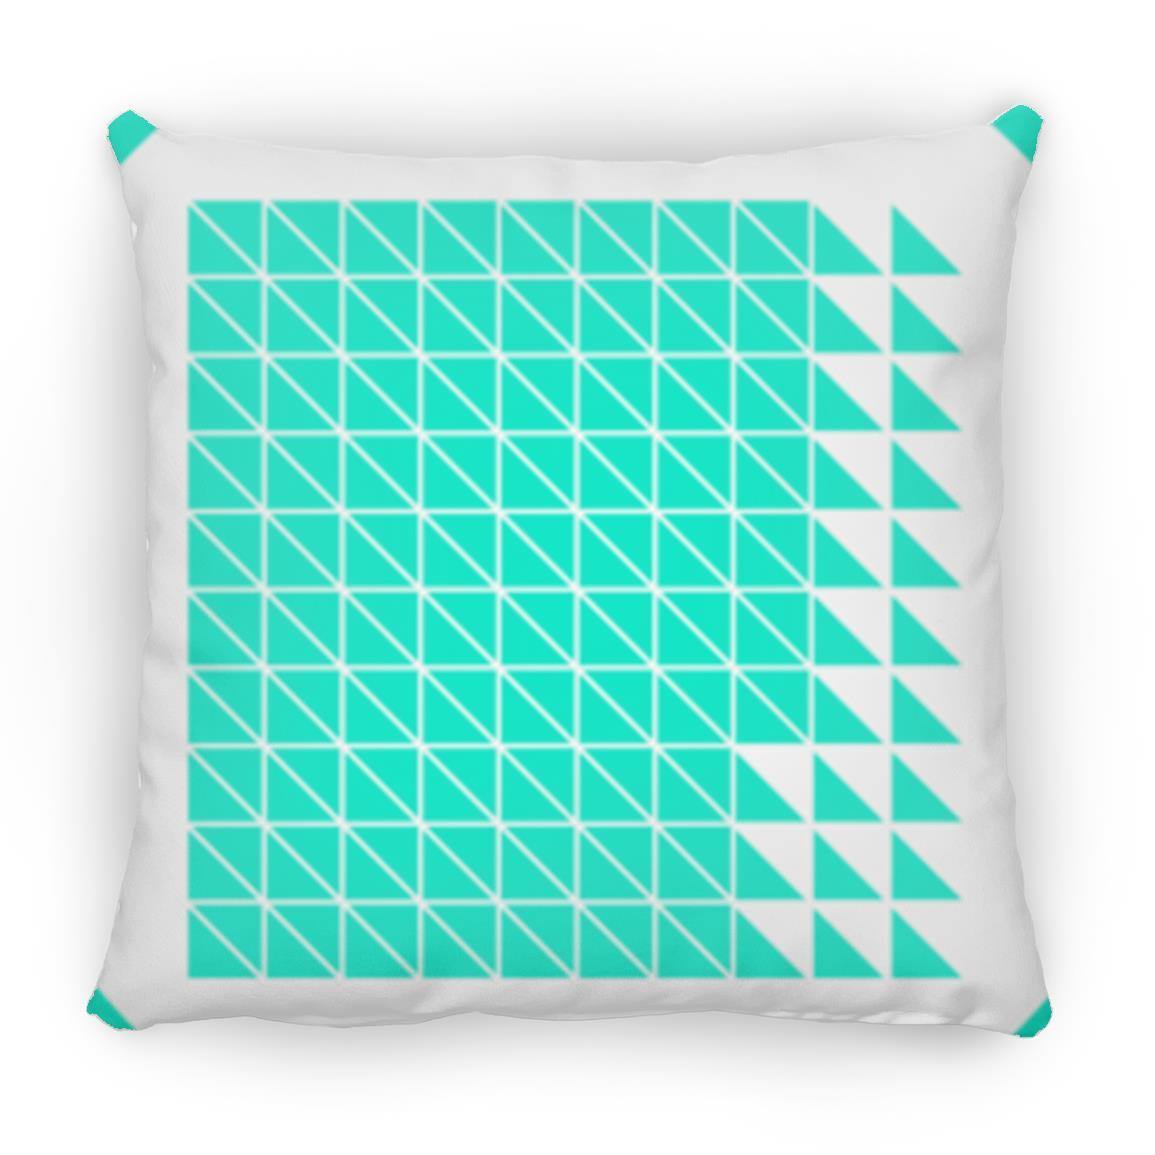 Crop Circle Pillow - Chilcomb - Shapes of Wisdom